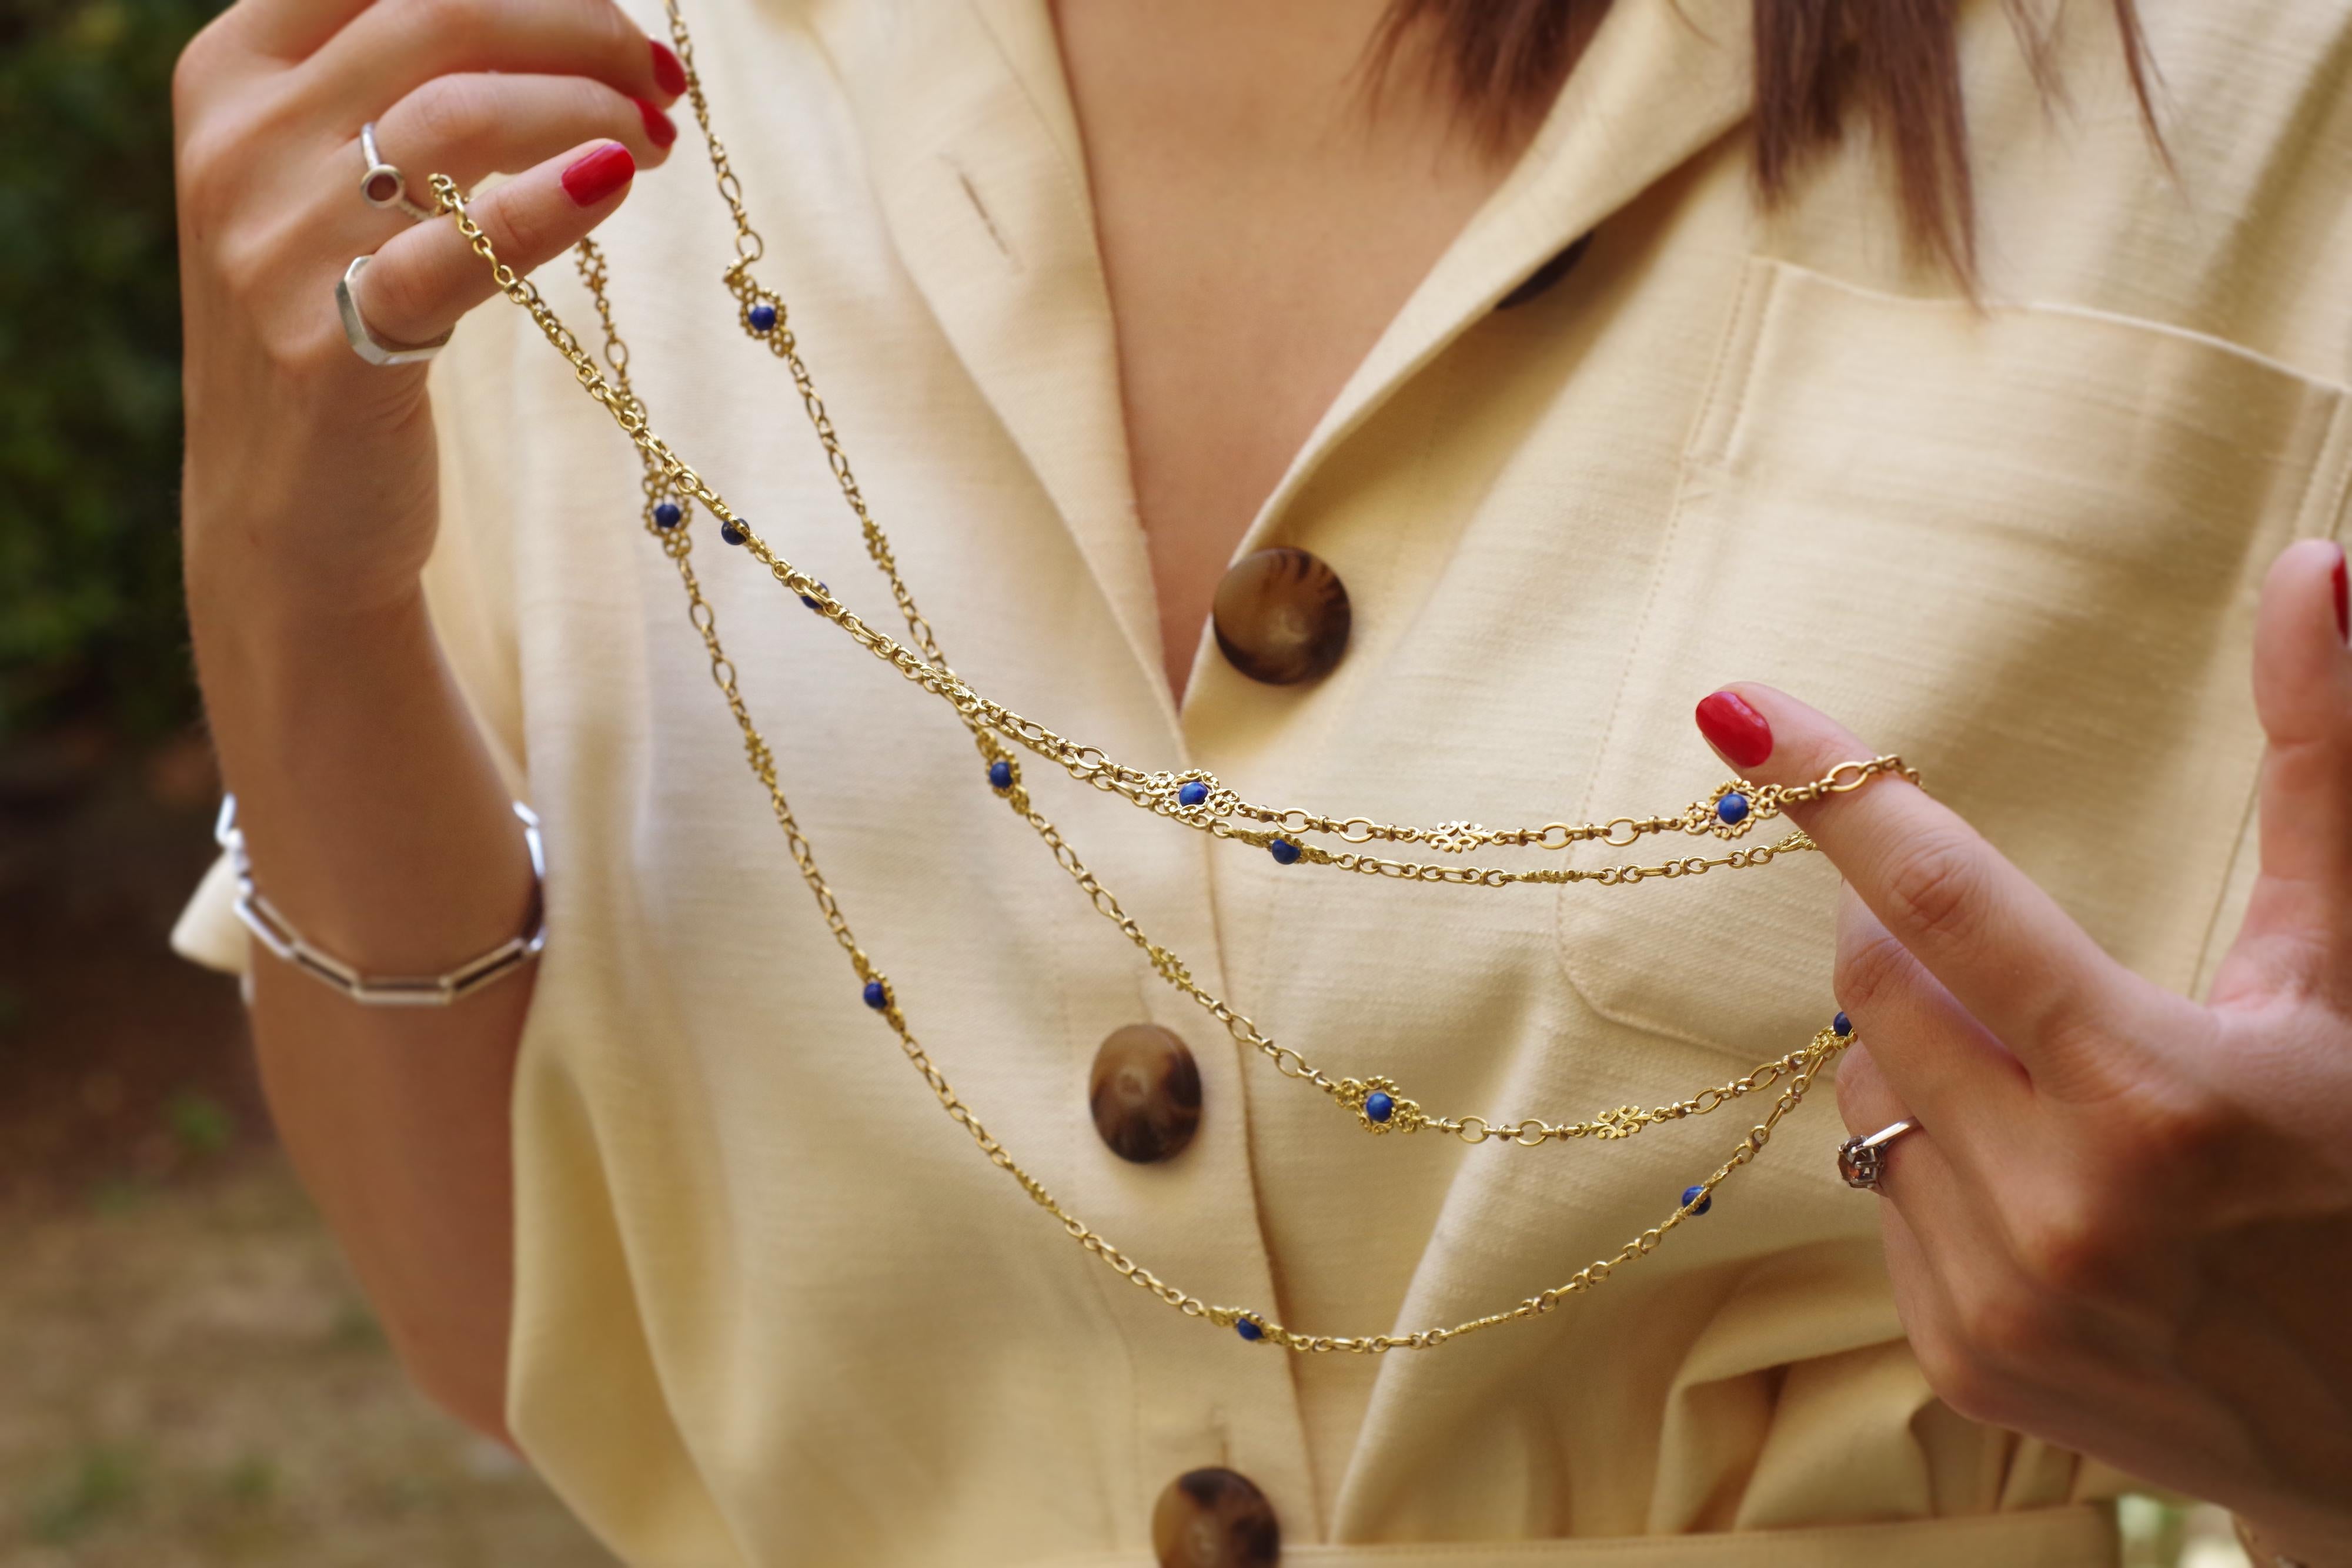 Long neogothic Victorian necklace in yellow gold 18 karats. Long necklace composed of seventeen links openwork and decorated with beads of lapis lazuli. The links are decorated with fine stylized garlands in a neogothic style of the late 19th